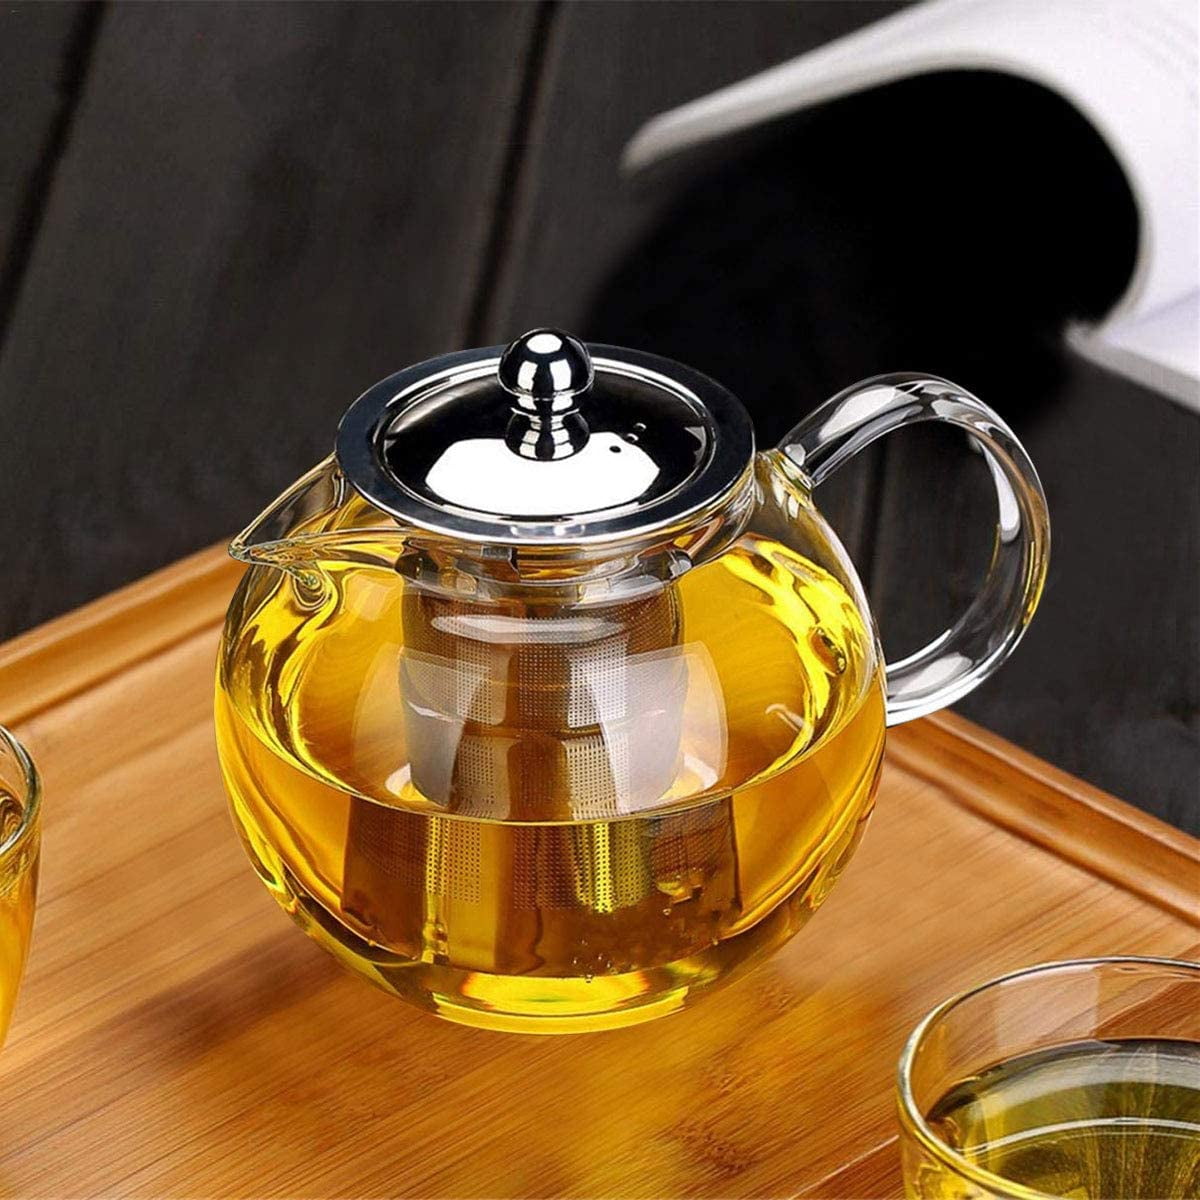 LURRIER Glass Teapot with Infuser, Portable Teapot Set with 360 Rotation Tea  maker and Infuser, Clear Tea Kettle with Wooden Handle, Blooming and Loose  Leaf Tea Maker for Camping - Yahoo Shopping